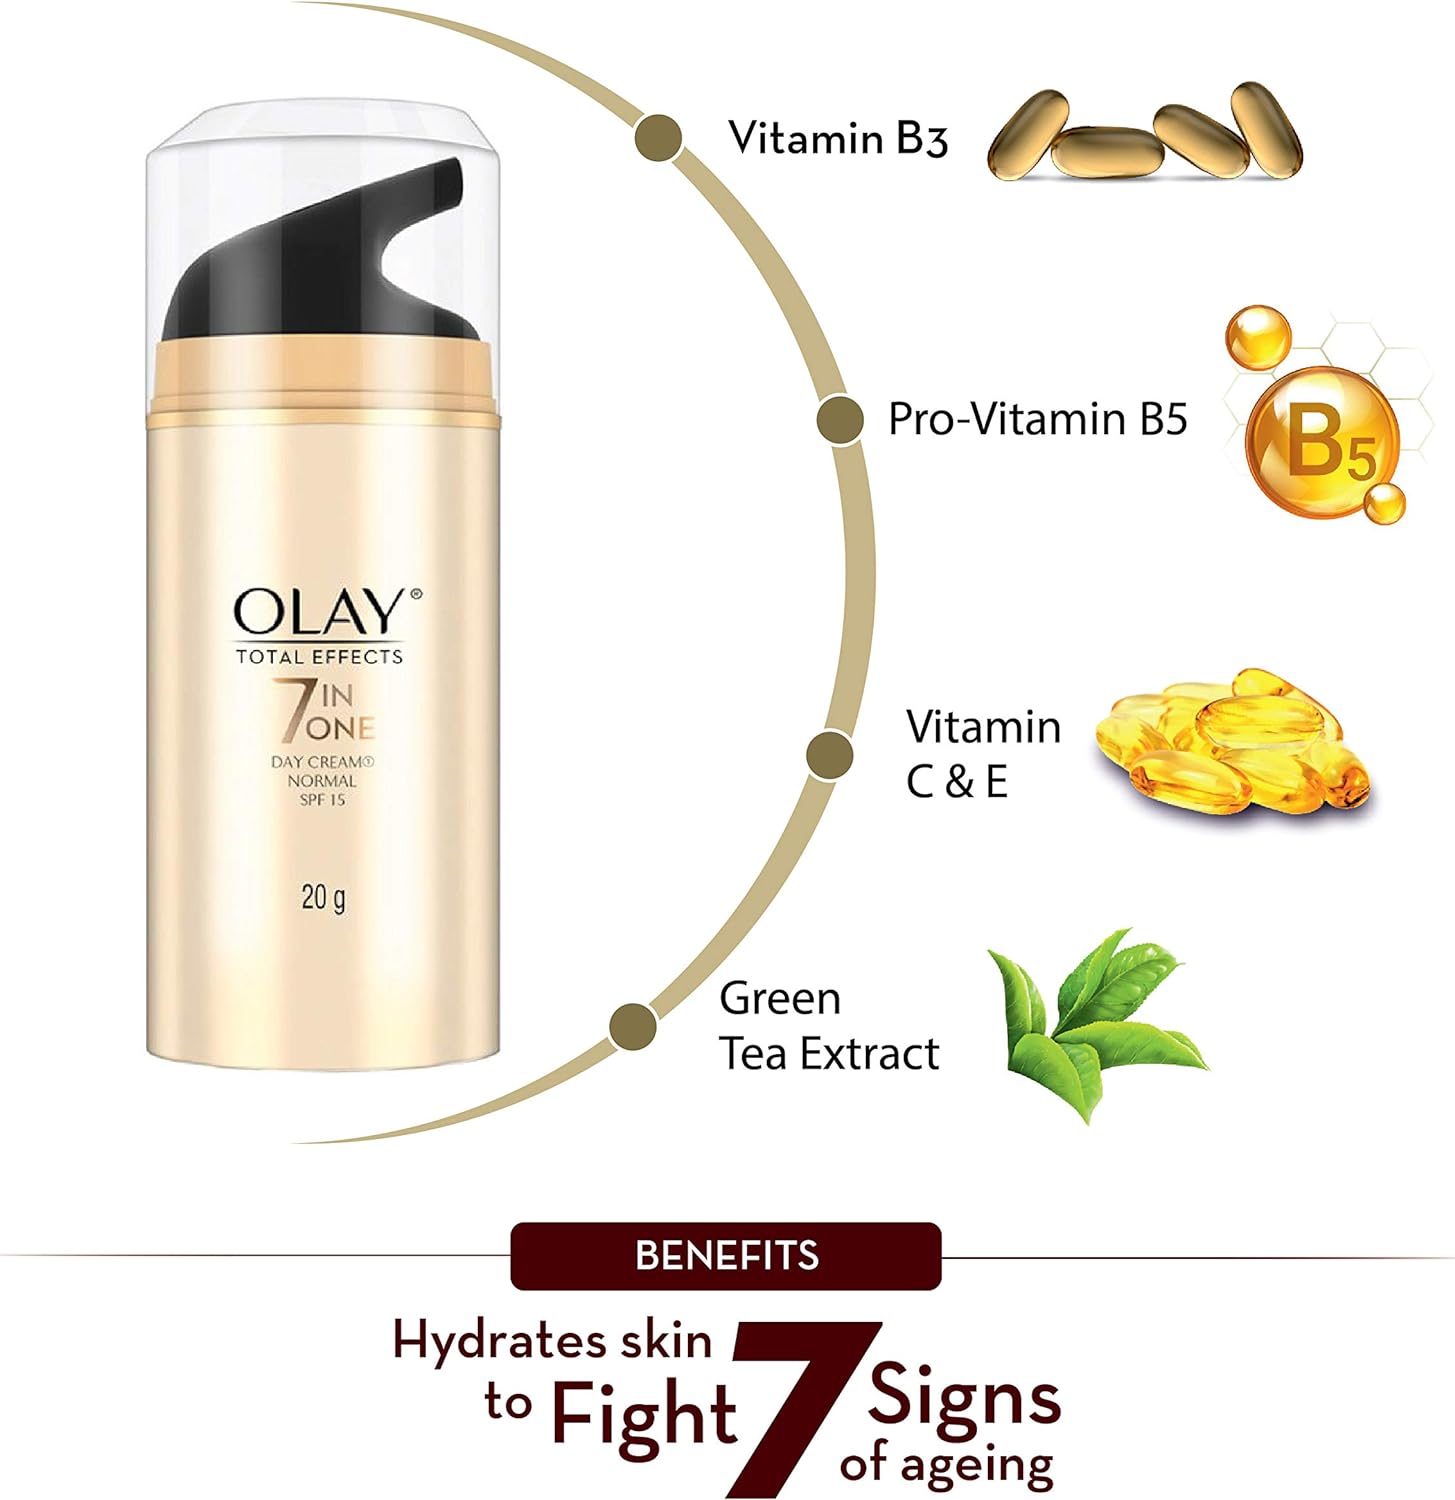 Olay face moisturizer Total Effects 7inOne Anti-Ageing Day cream SPF15 with Vitamin B3, 20 g